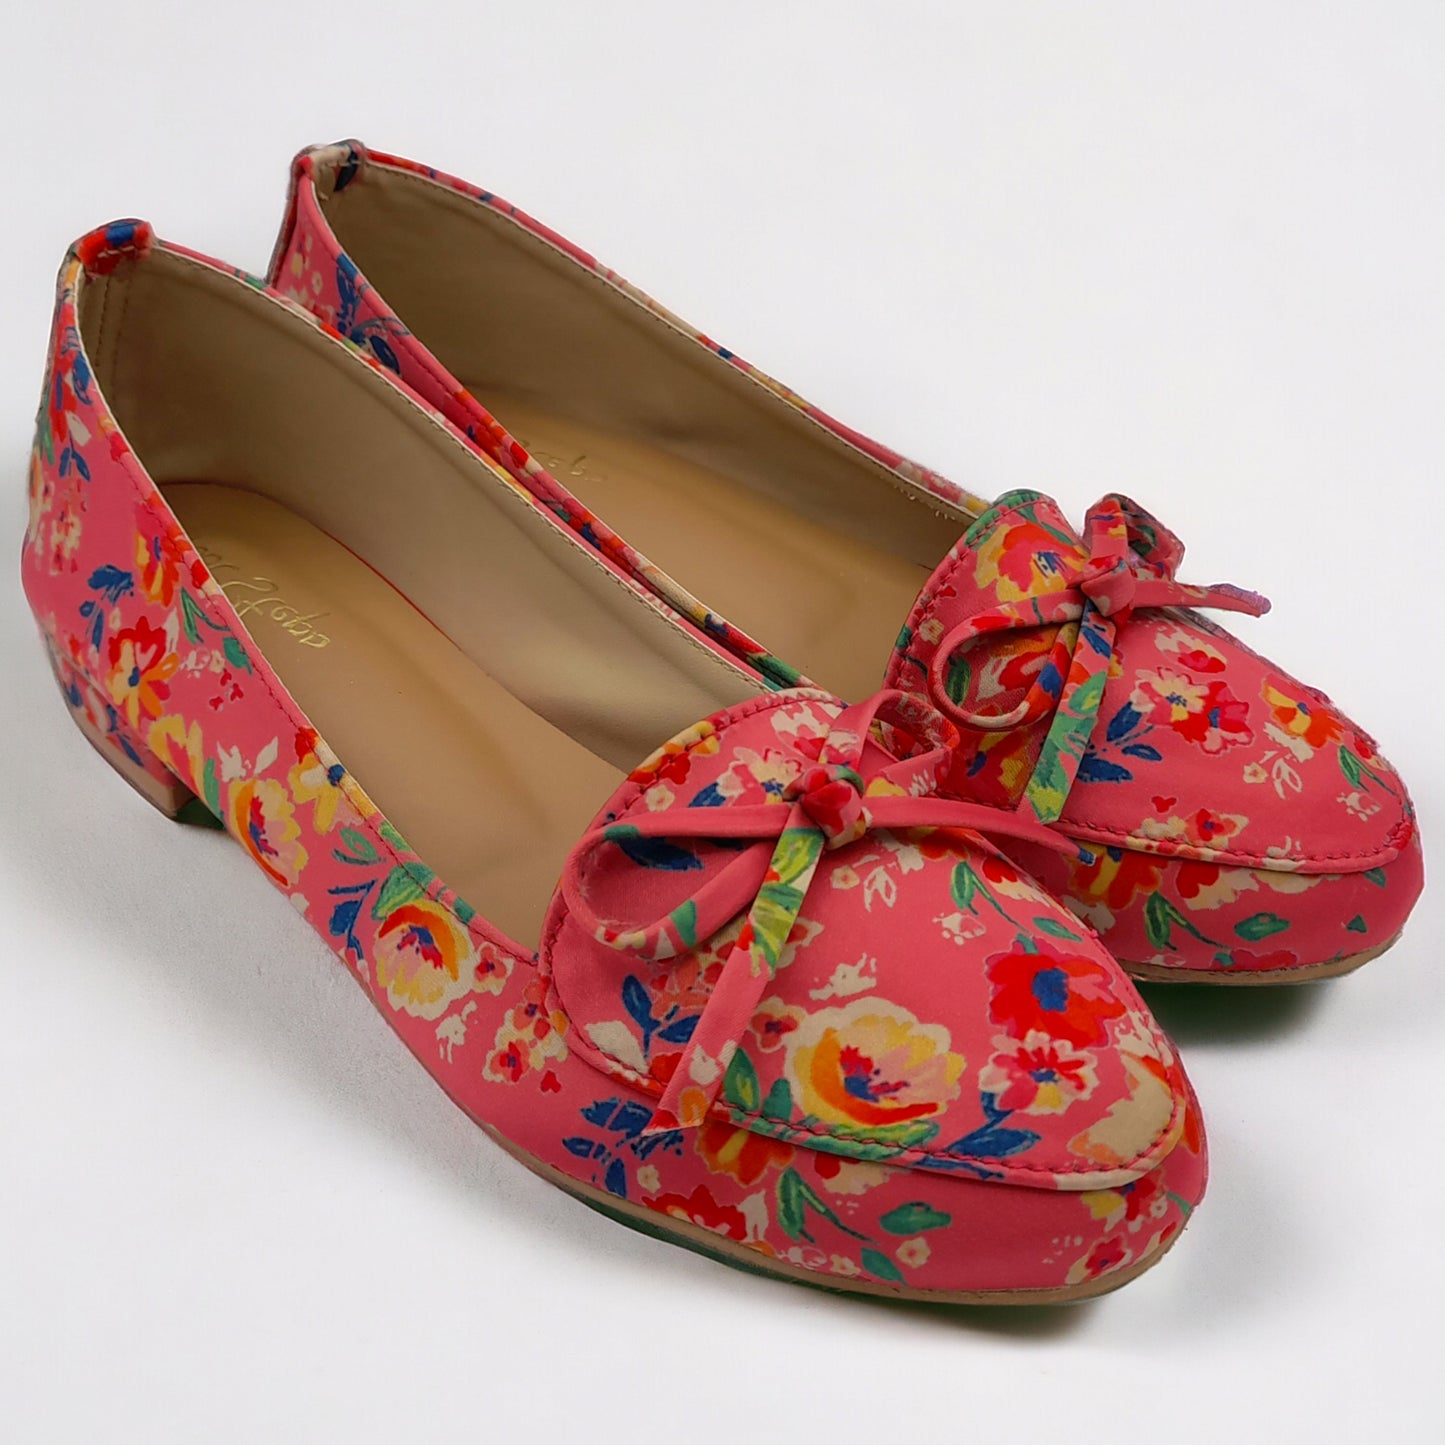 Floral Printed Loafer Shoes